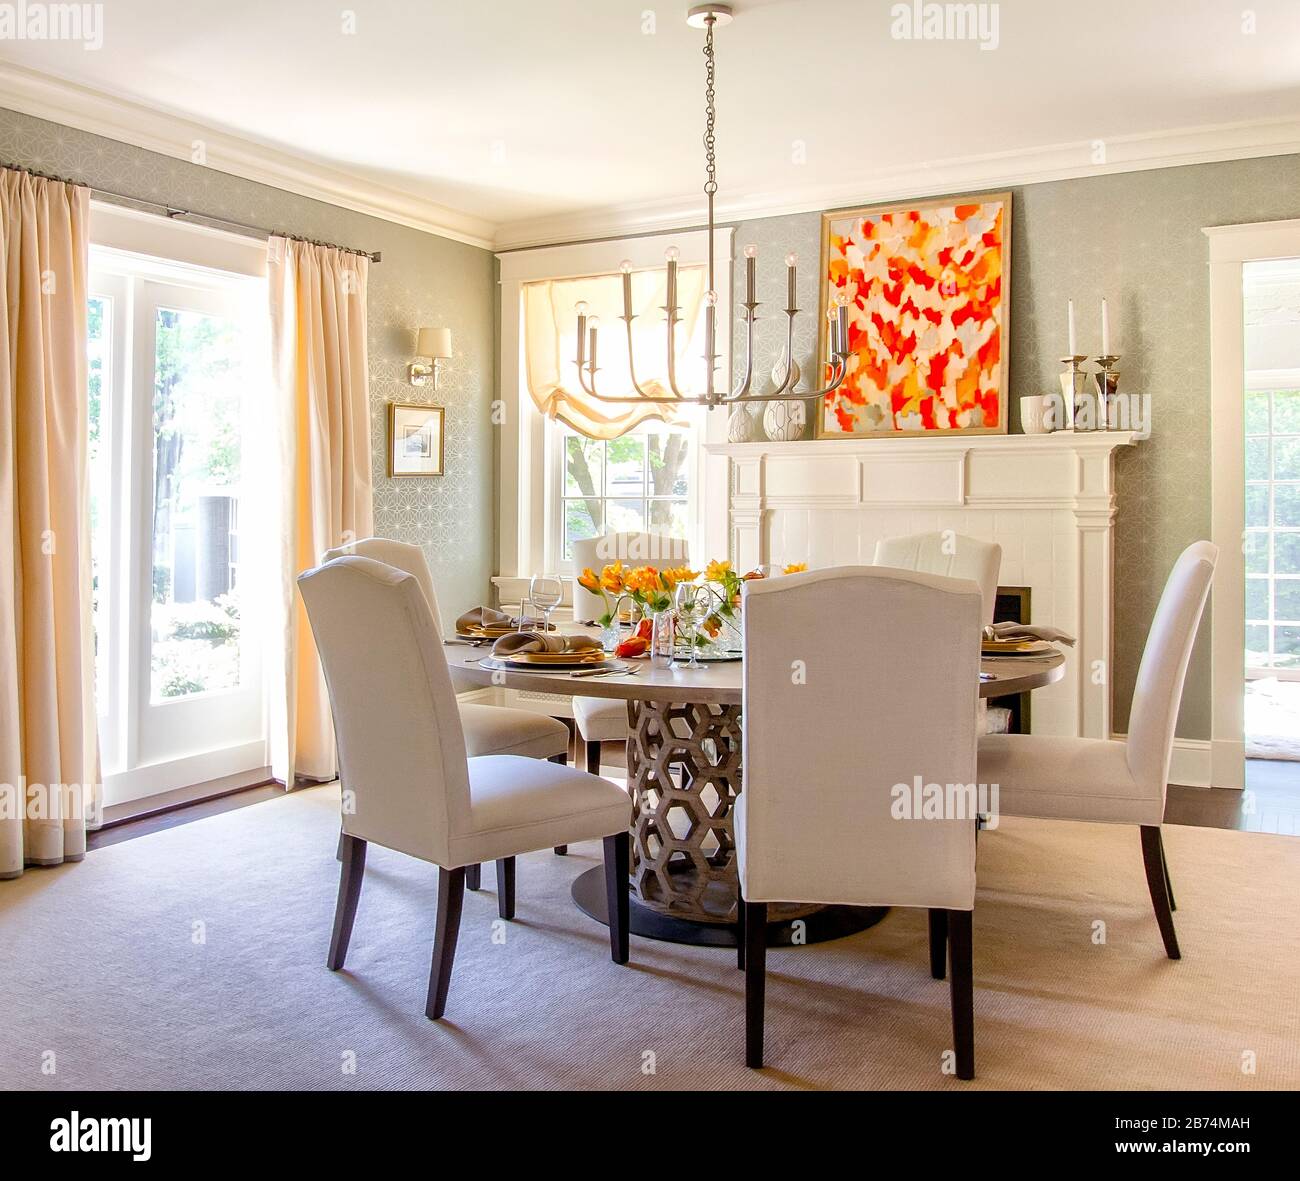 Dining room with round table Stock Photo